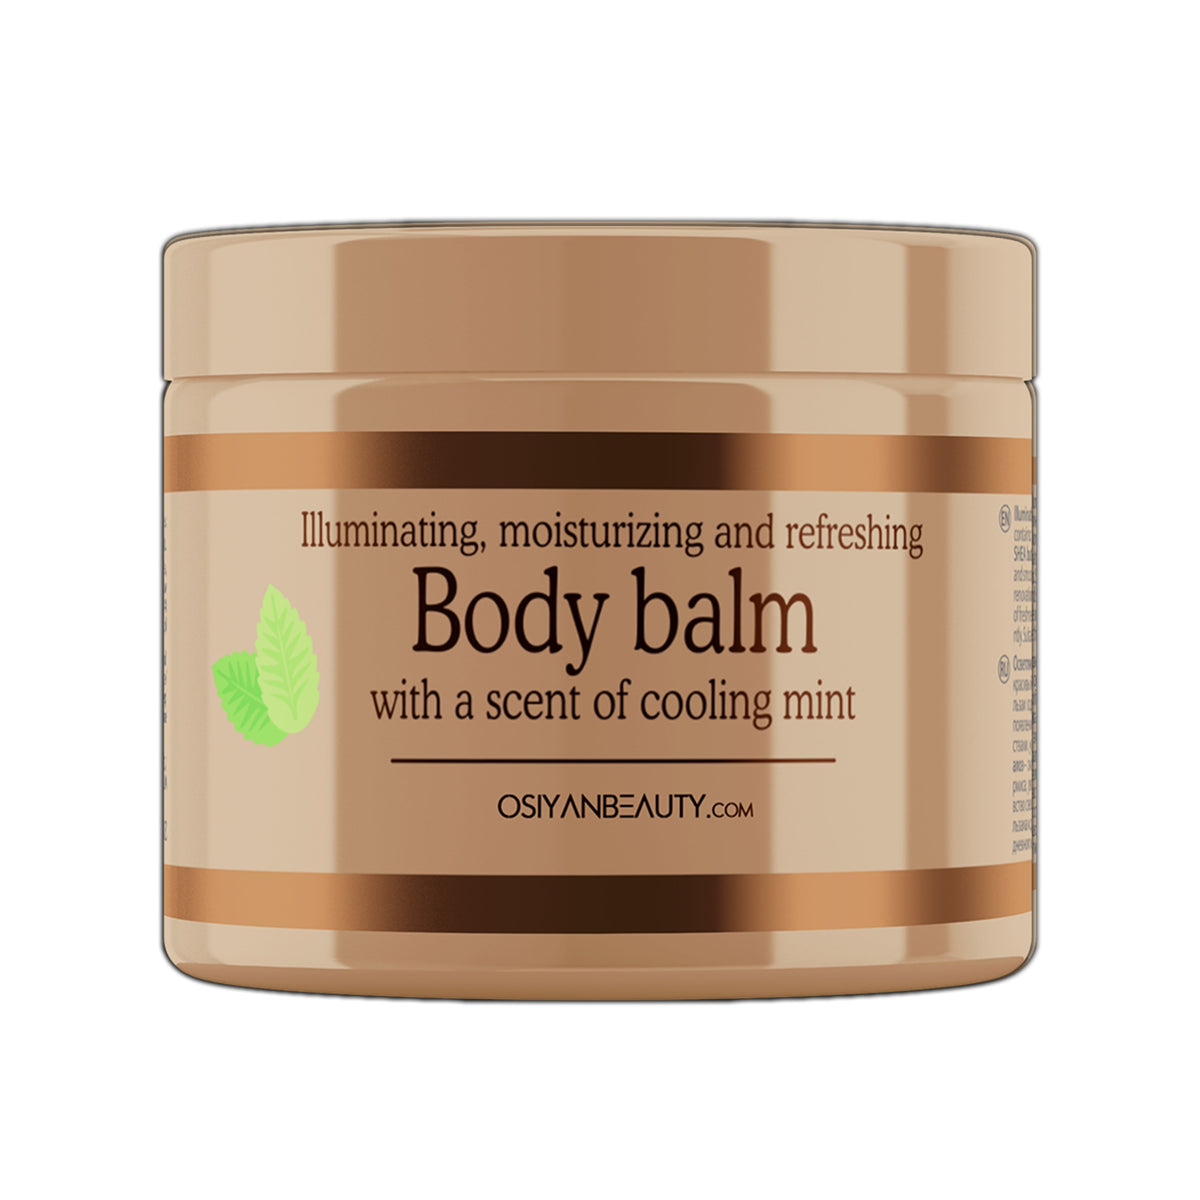 Moisturizing Body Balm with a scent of cooling mint (Made in Europe)